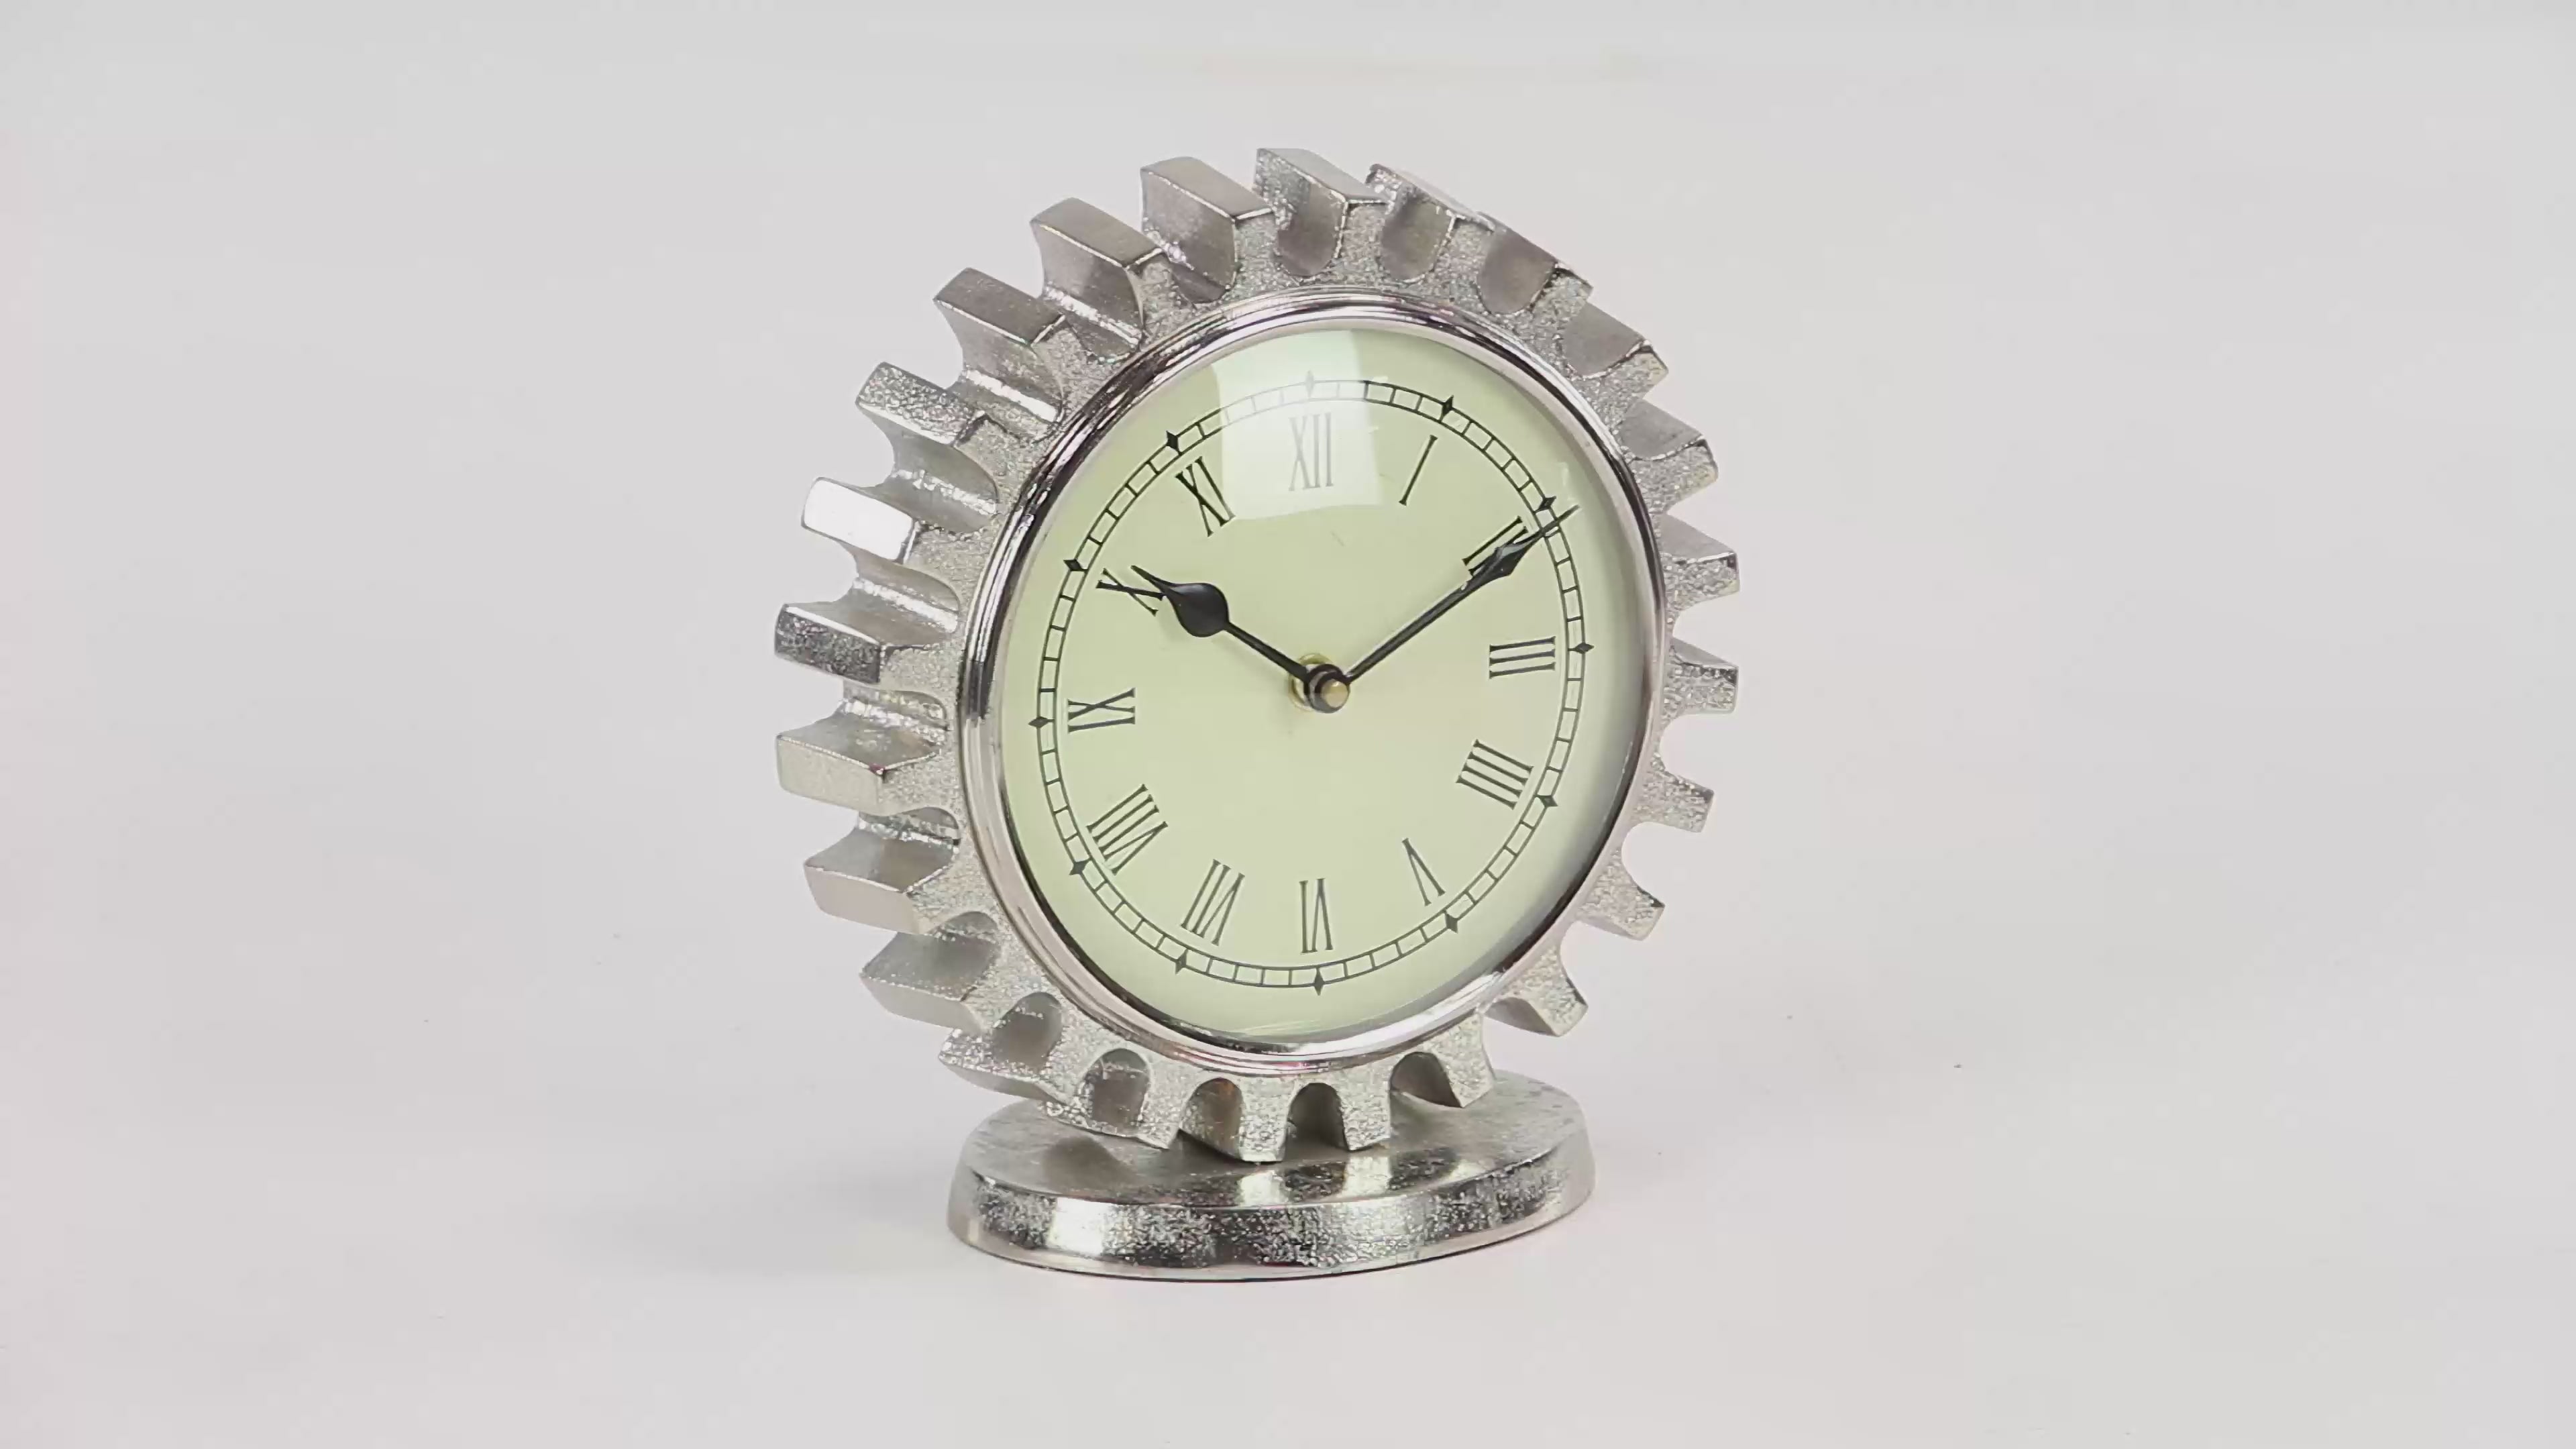 Textured silver aluminum gear shaped table clock. Clock is spinning 360 degrees and has a beige face with black roman numerals and hands. Behind is white background